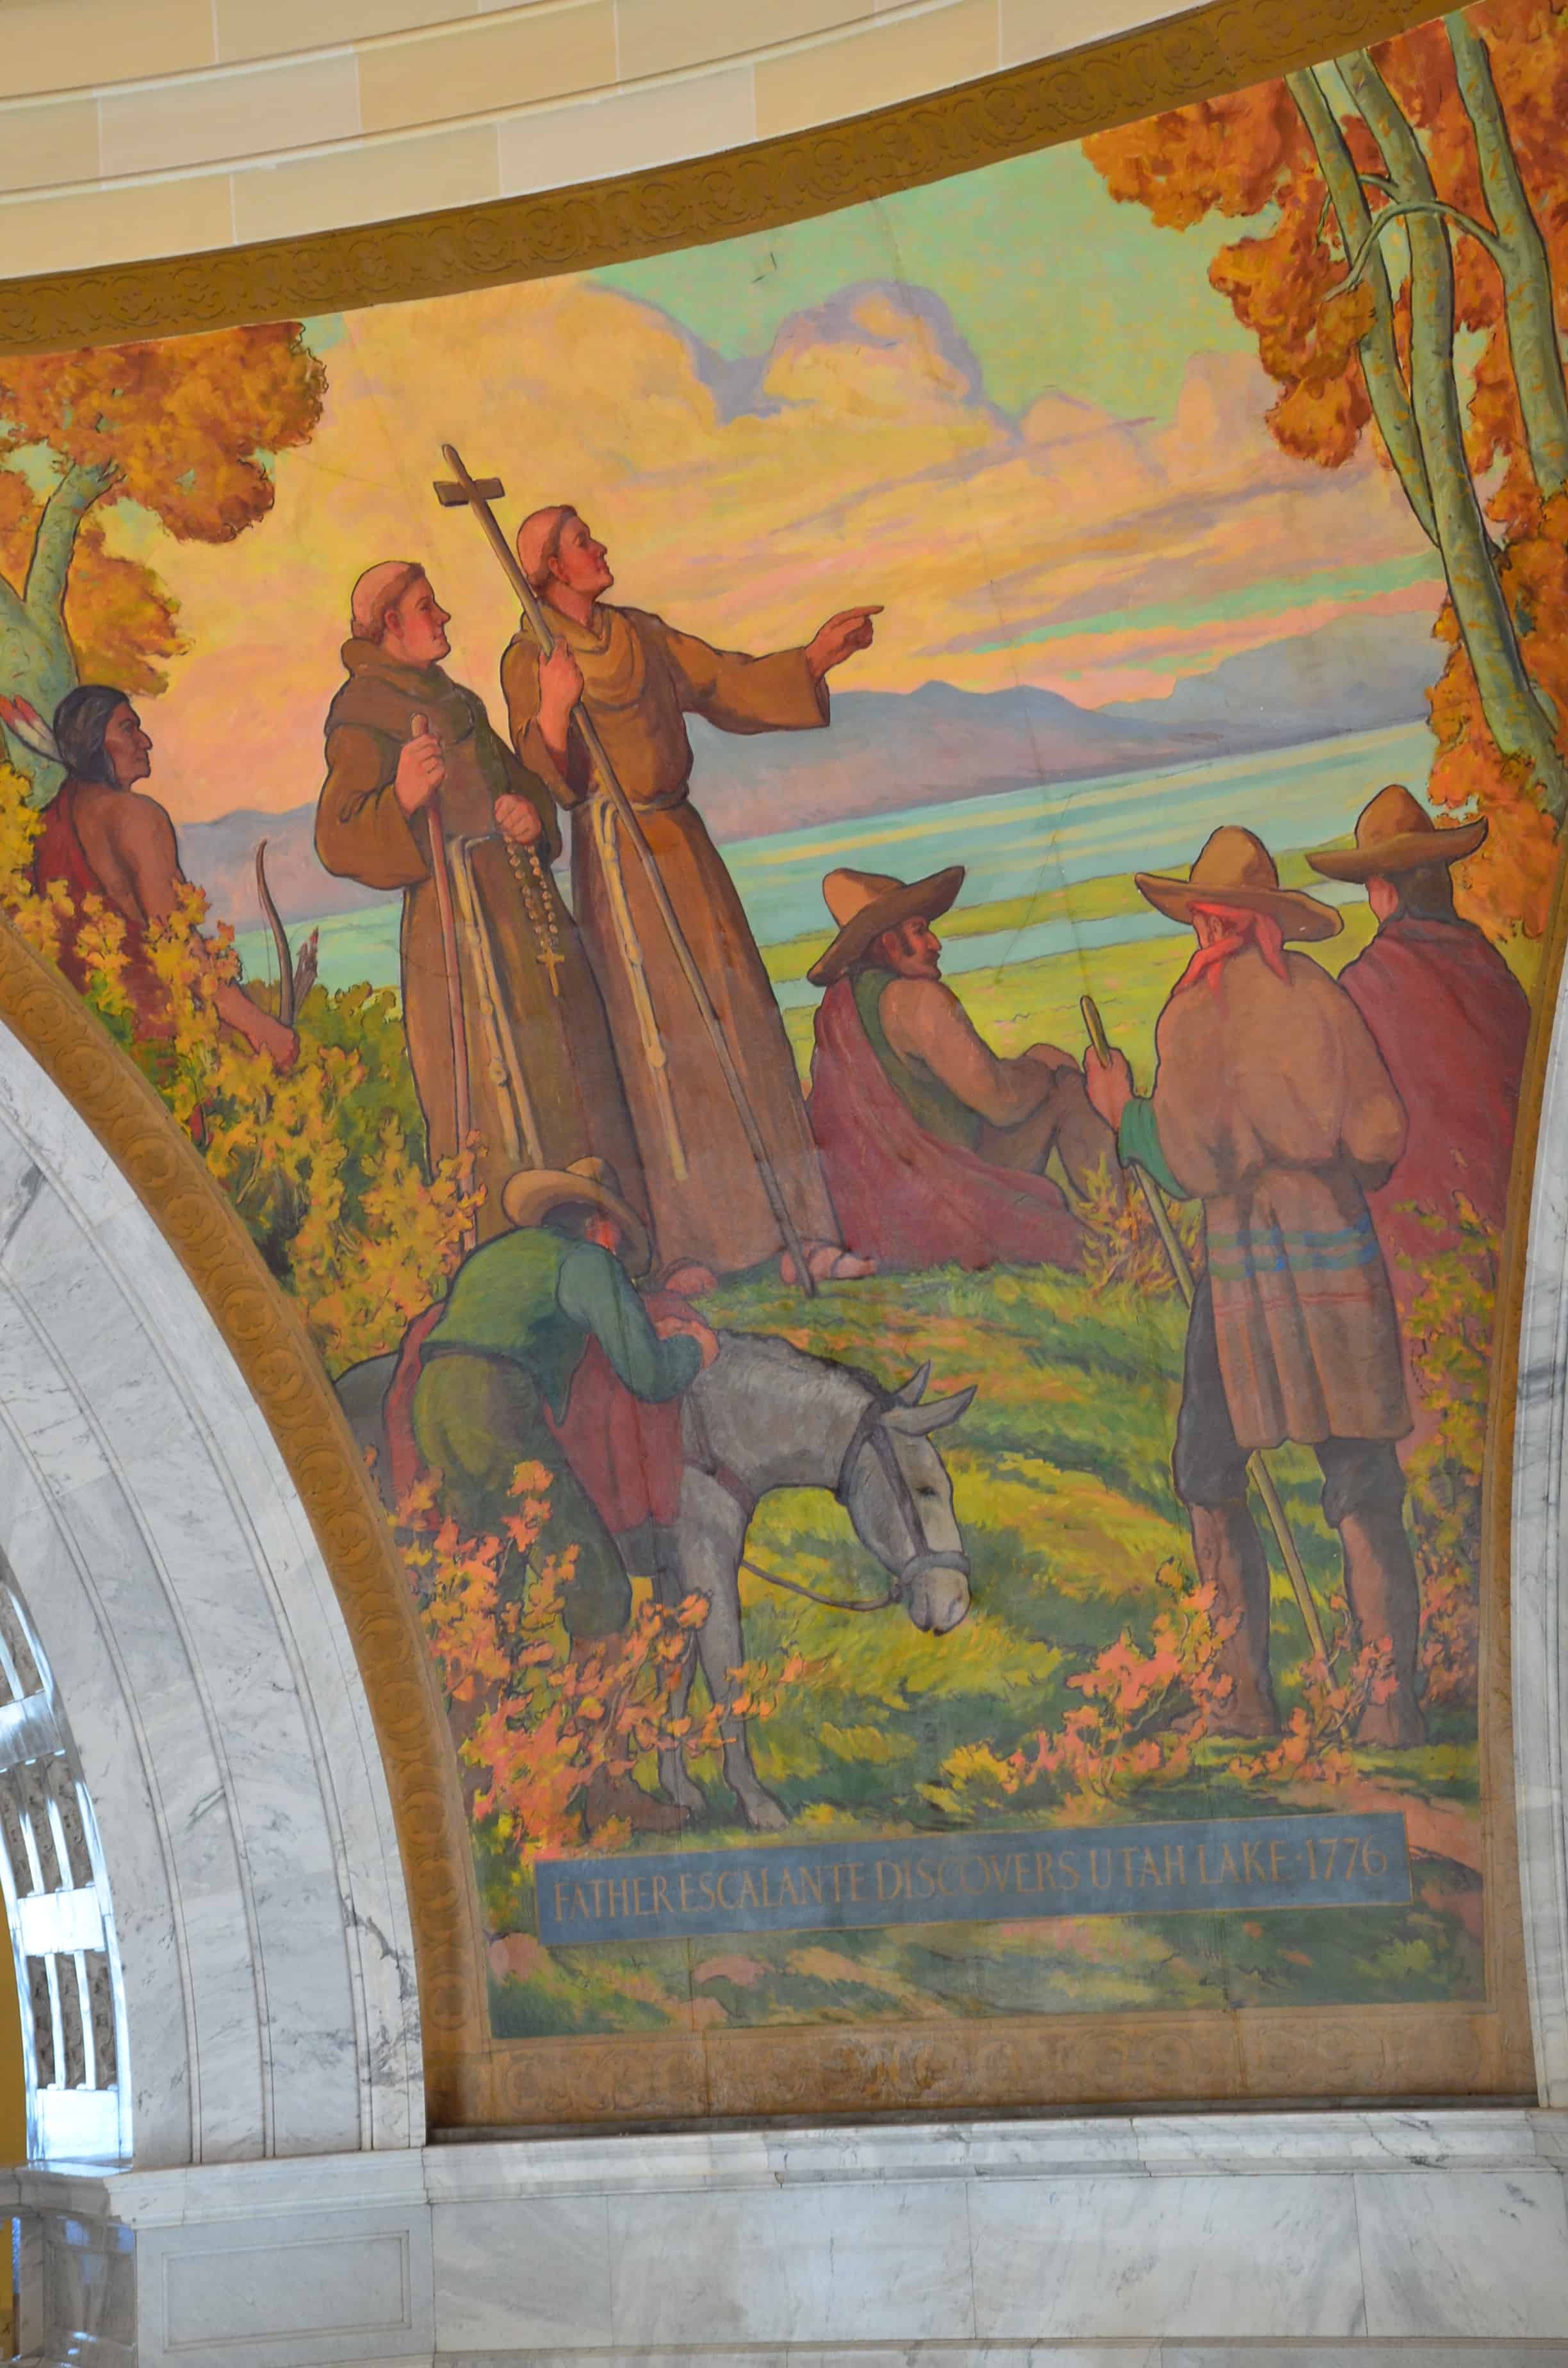 Father Escalante Discovers Utah Lake - 1776, by Lee Greene Richards (1934) at the Utah State Capitol in Salt Lake City